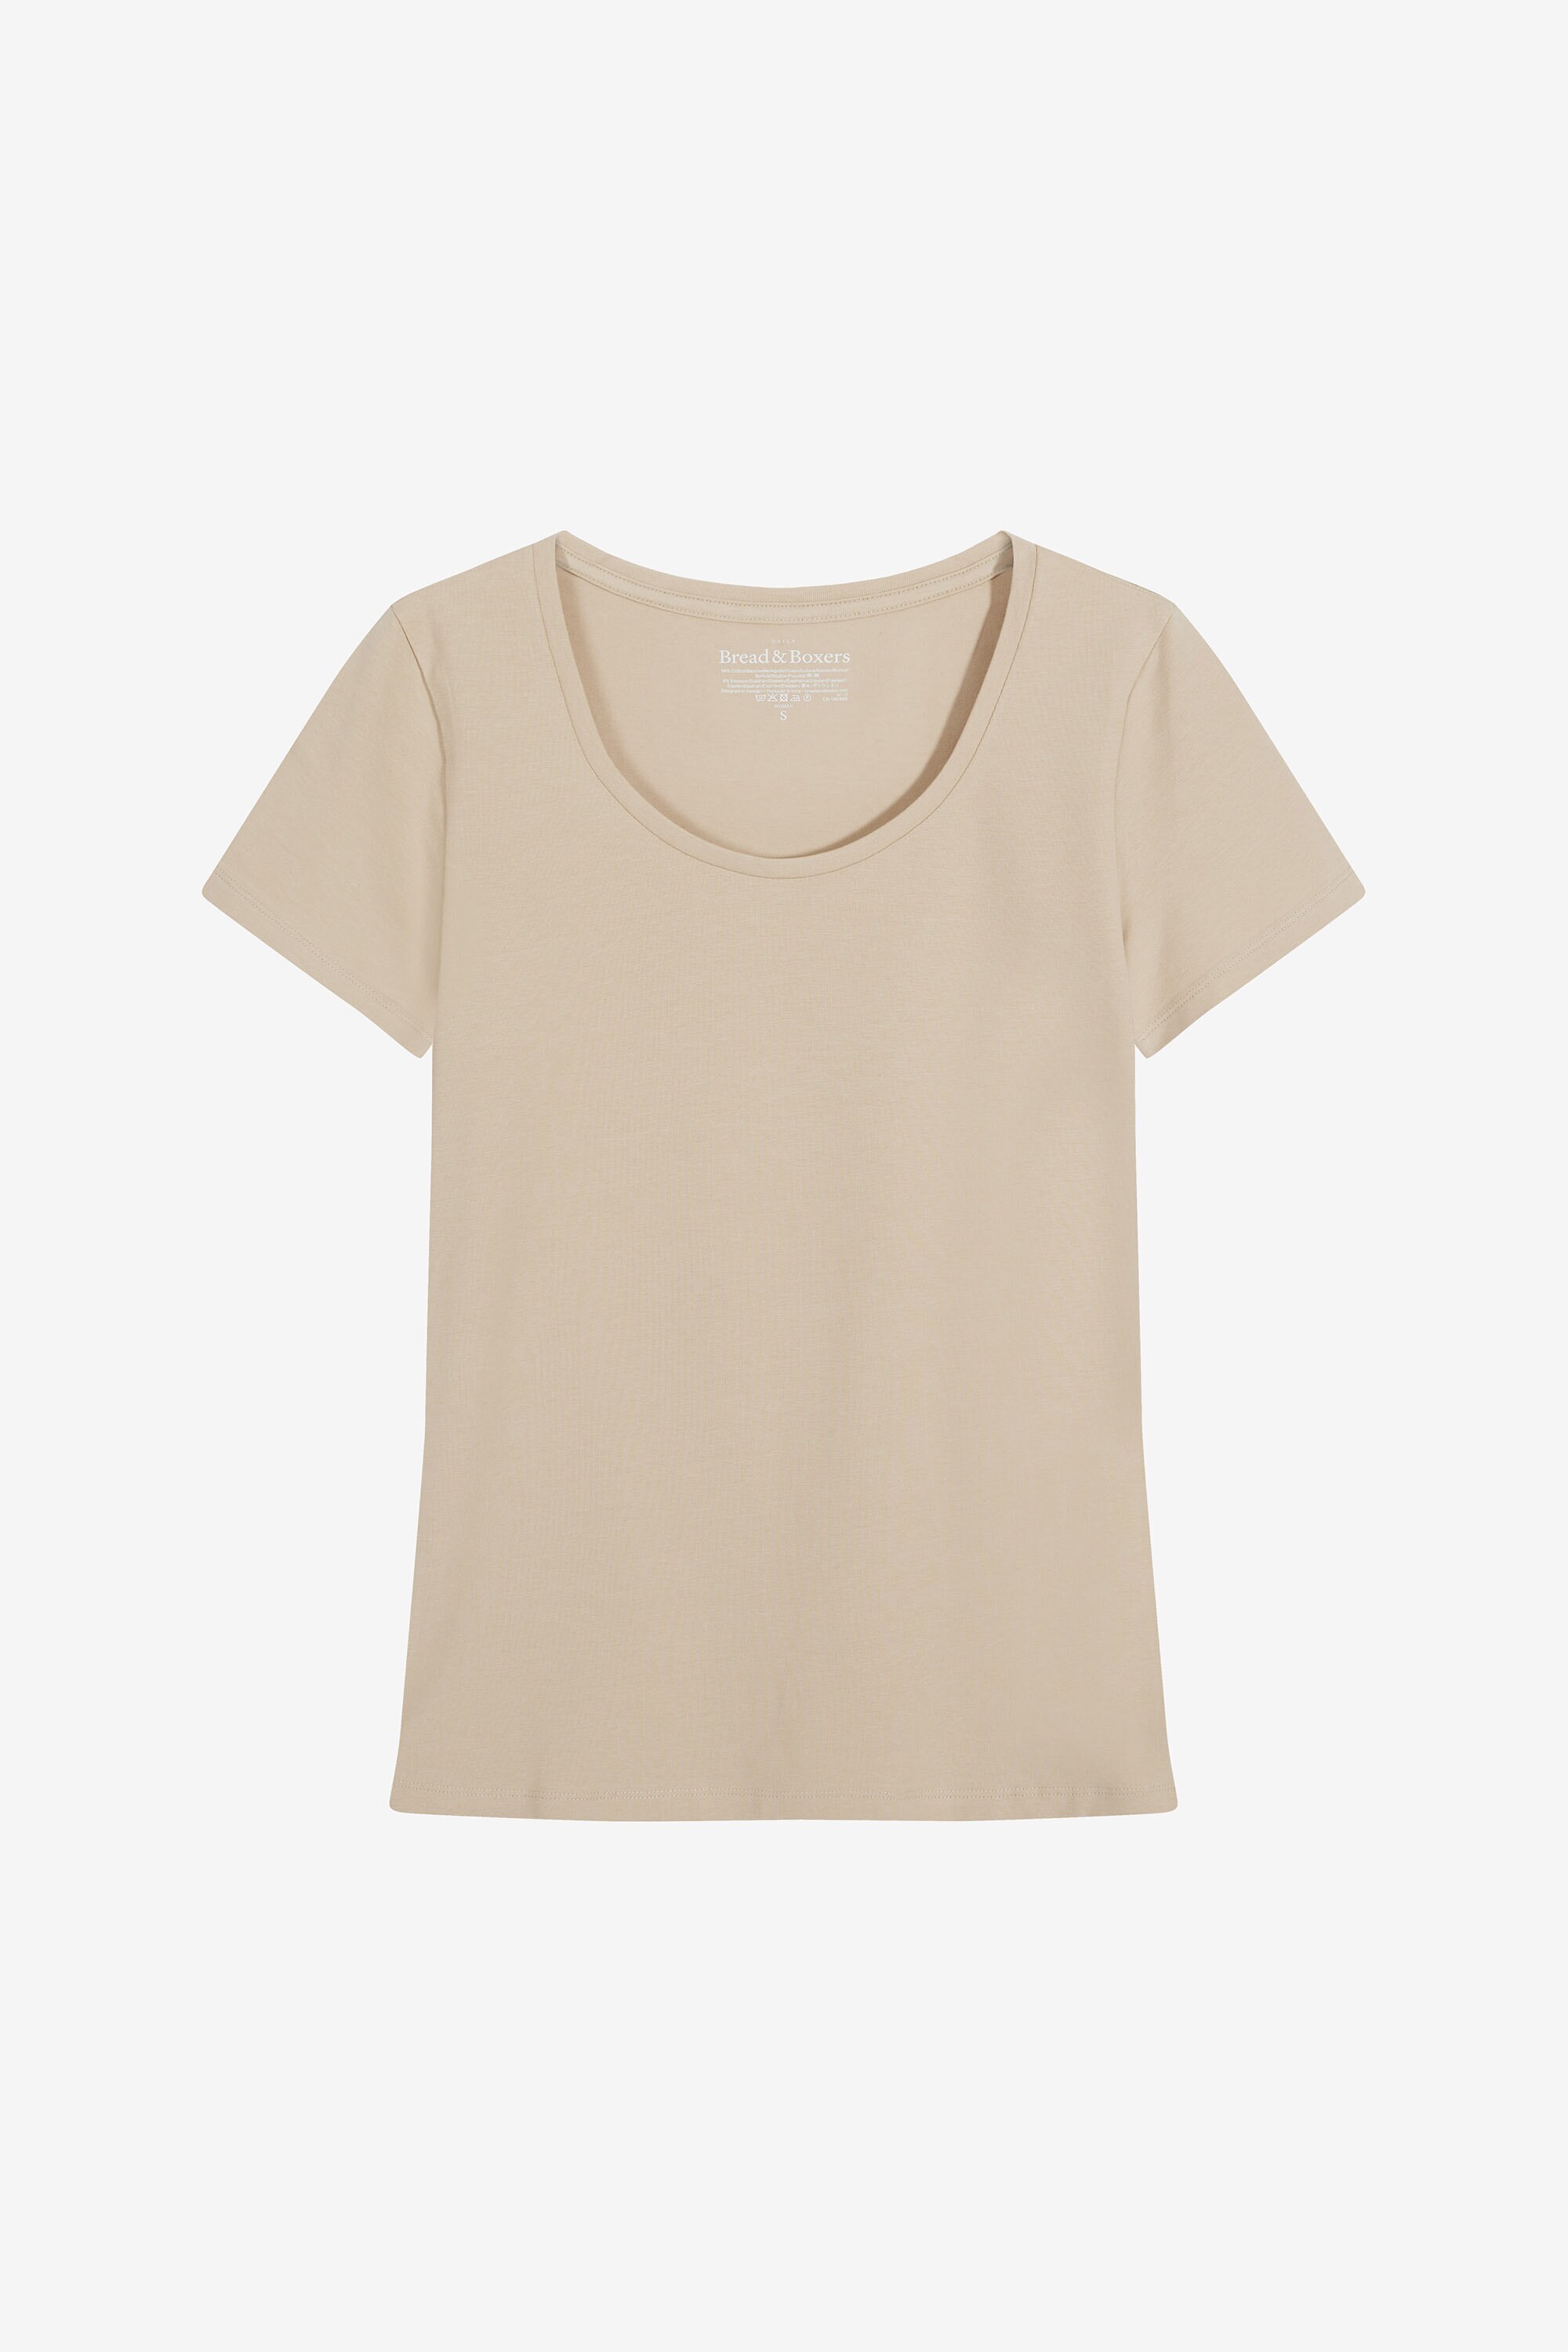 Beige T-shirt for women with round neck of organic and elastane Bread Boxers